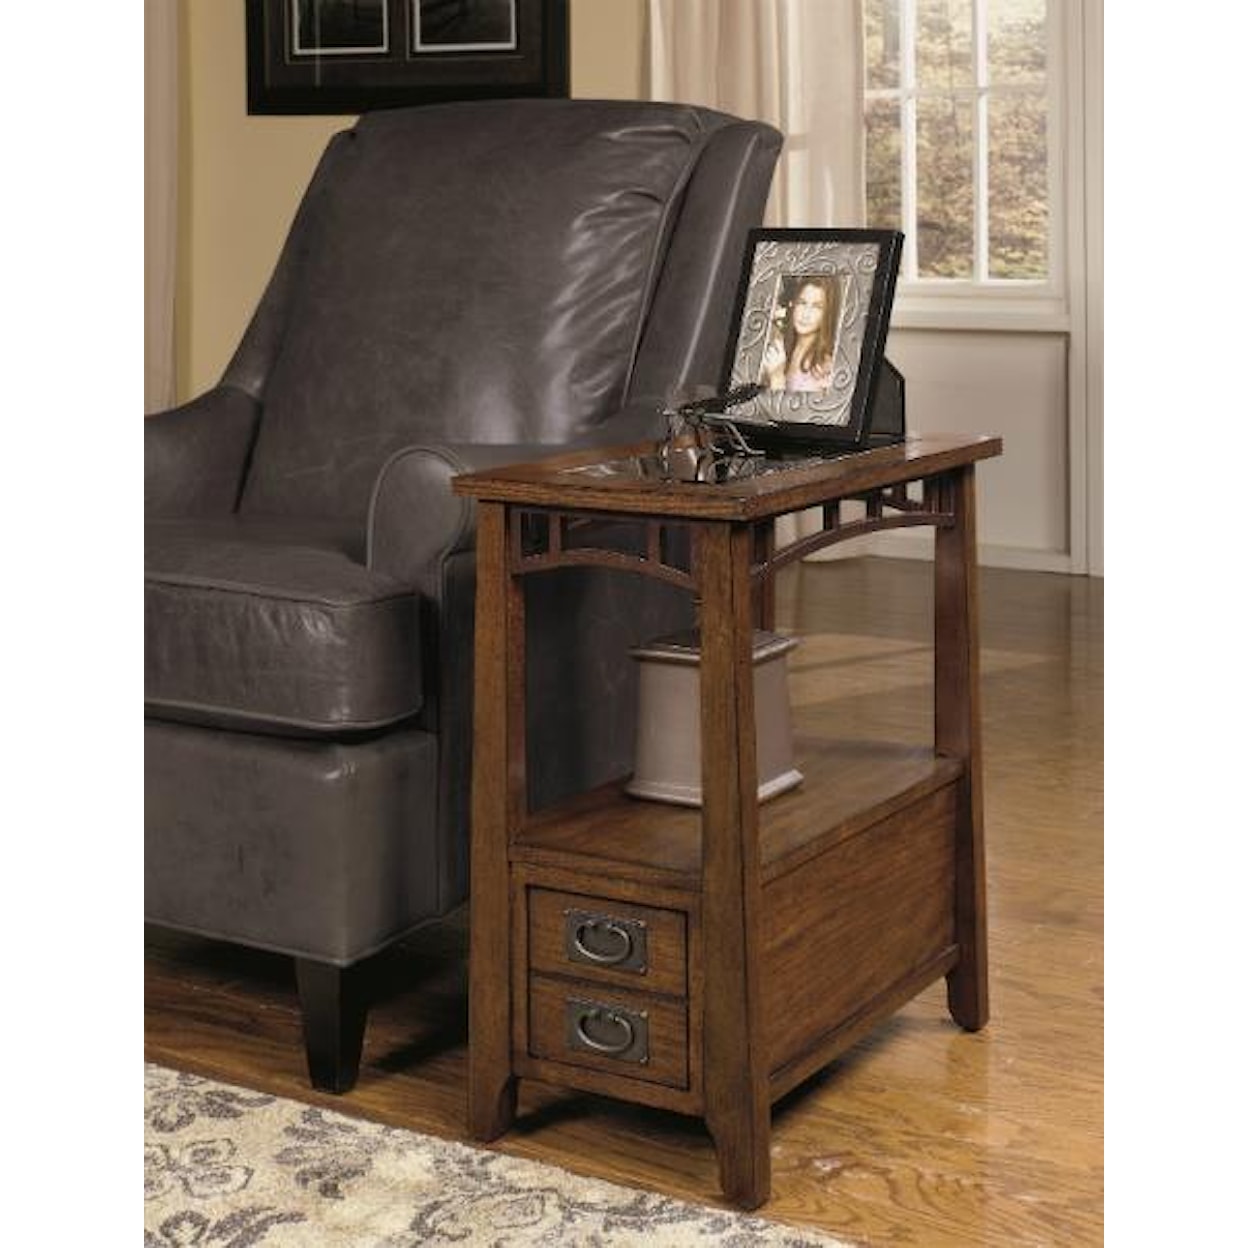 Null Furniture 4013 Chairside End